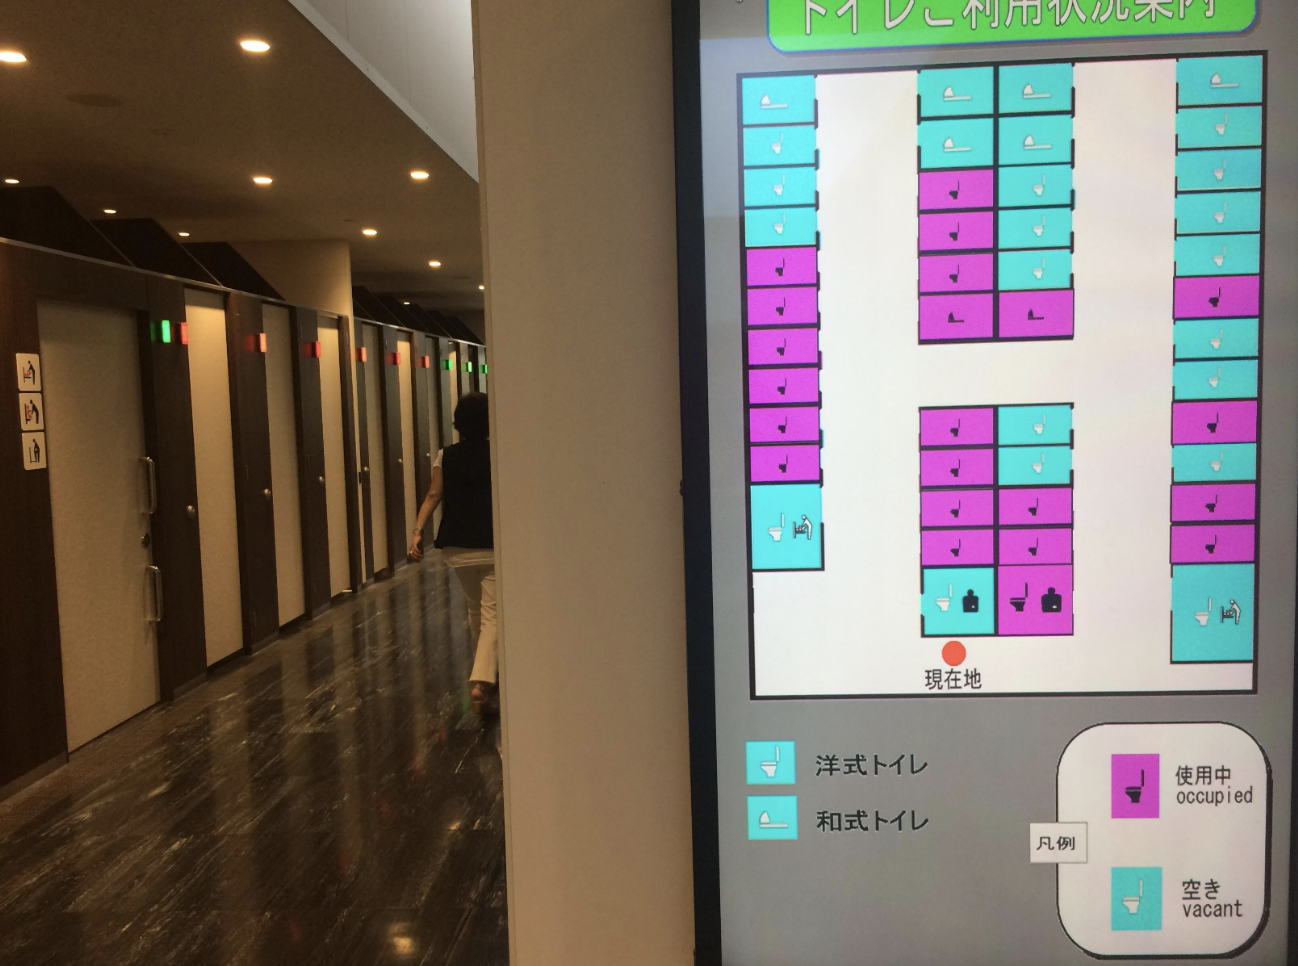 In front of a line of toilets is an electronic screen that shows the row of toilets and has icons indicating which are currently occupied